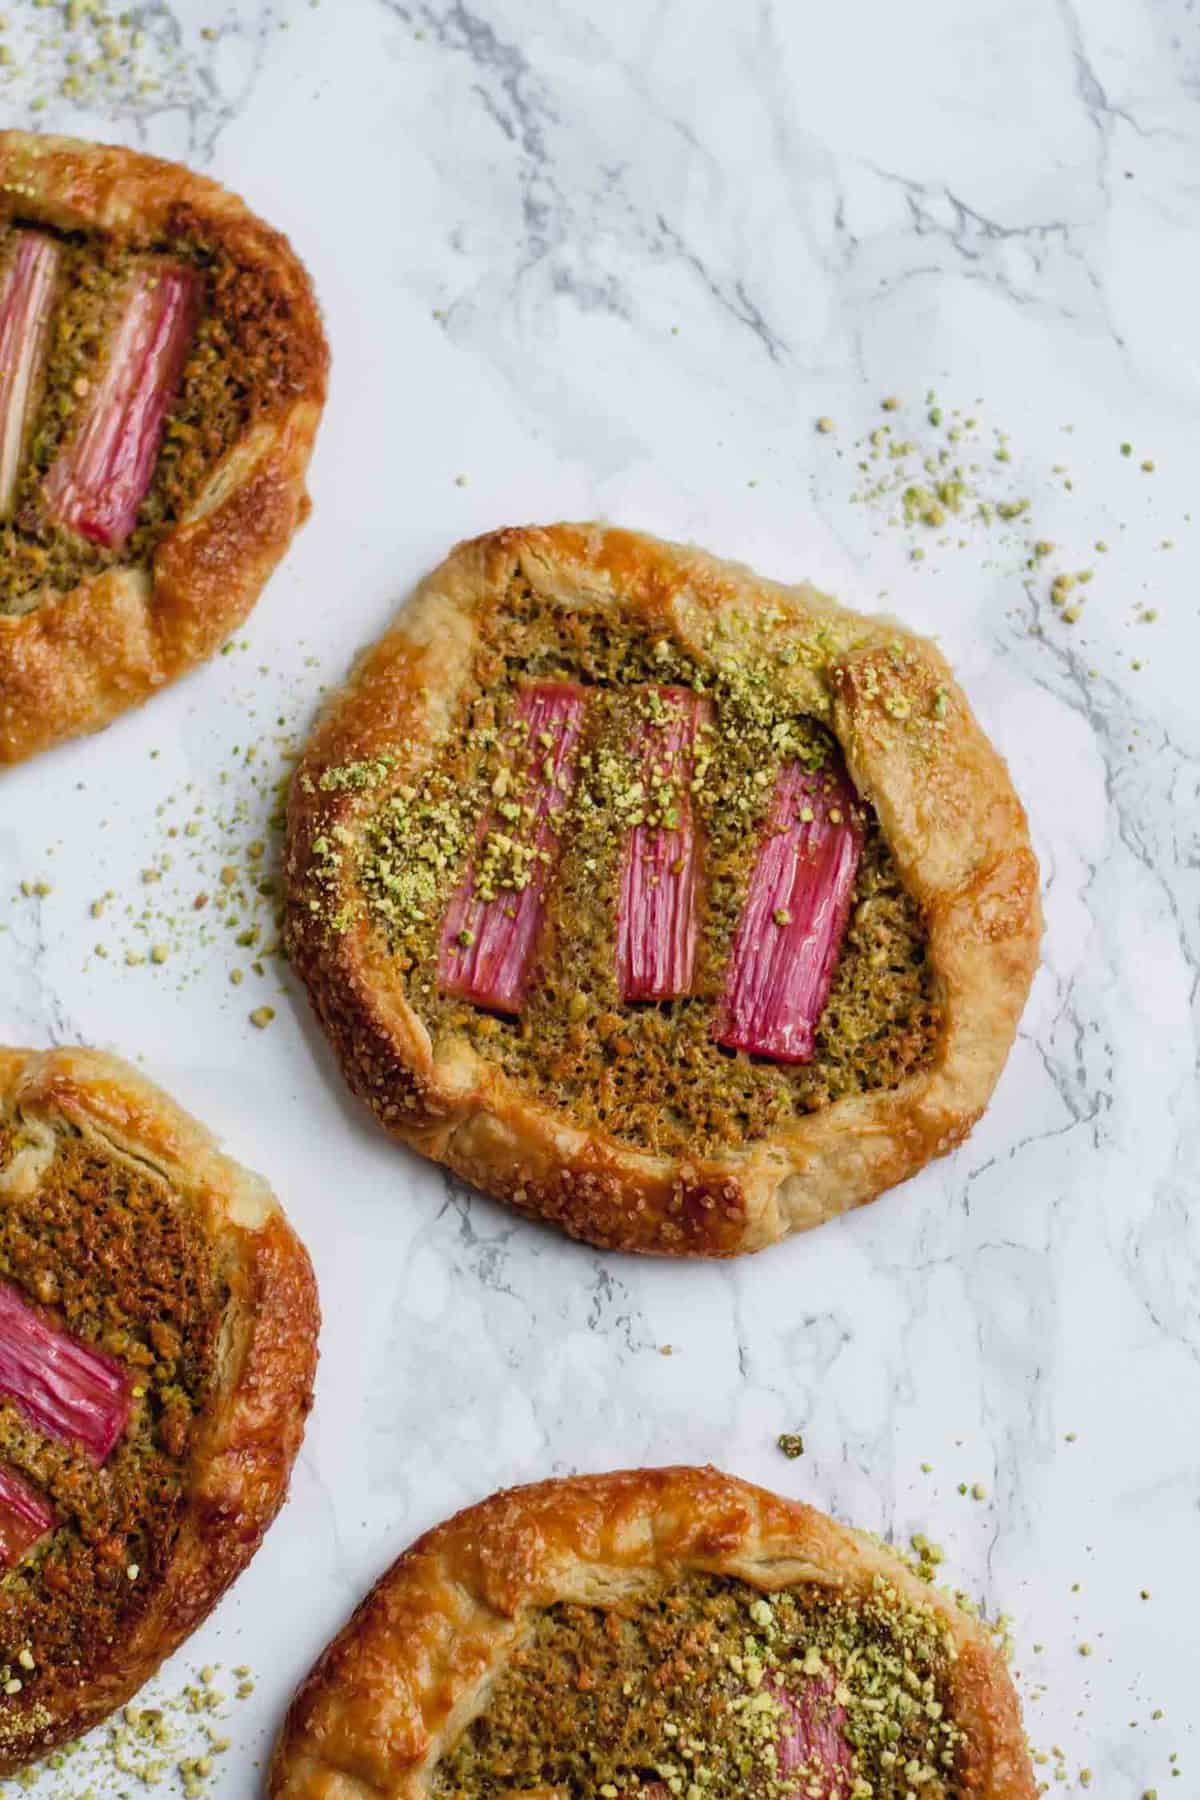 Pistachio frangipane galettes baked on a marble surface.